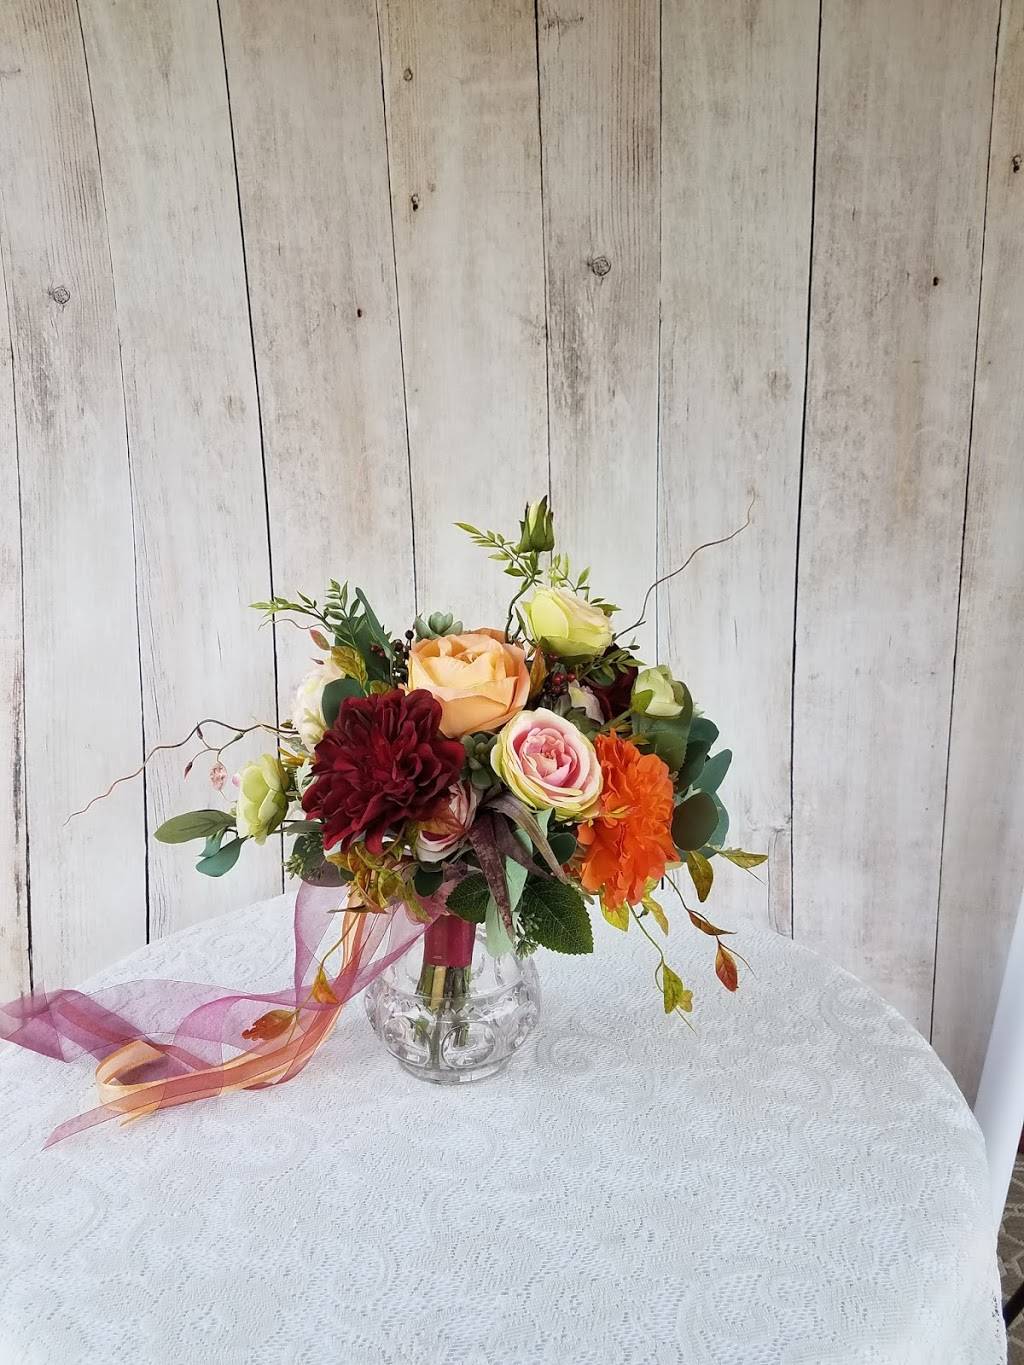 Just Anns Floral Design | 604 Chieftain Dr, Fairdale, KY 40118 | Phone: (812) 204-4041